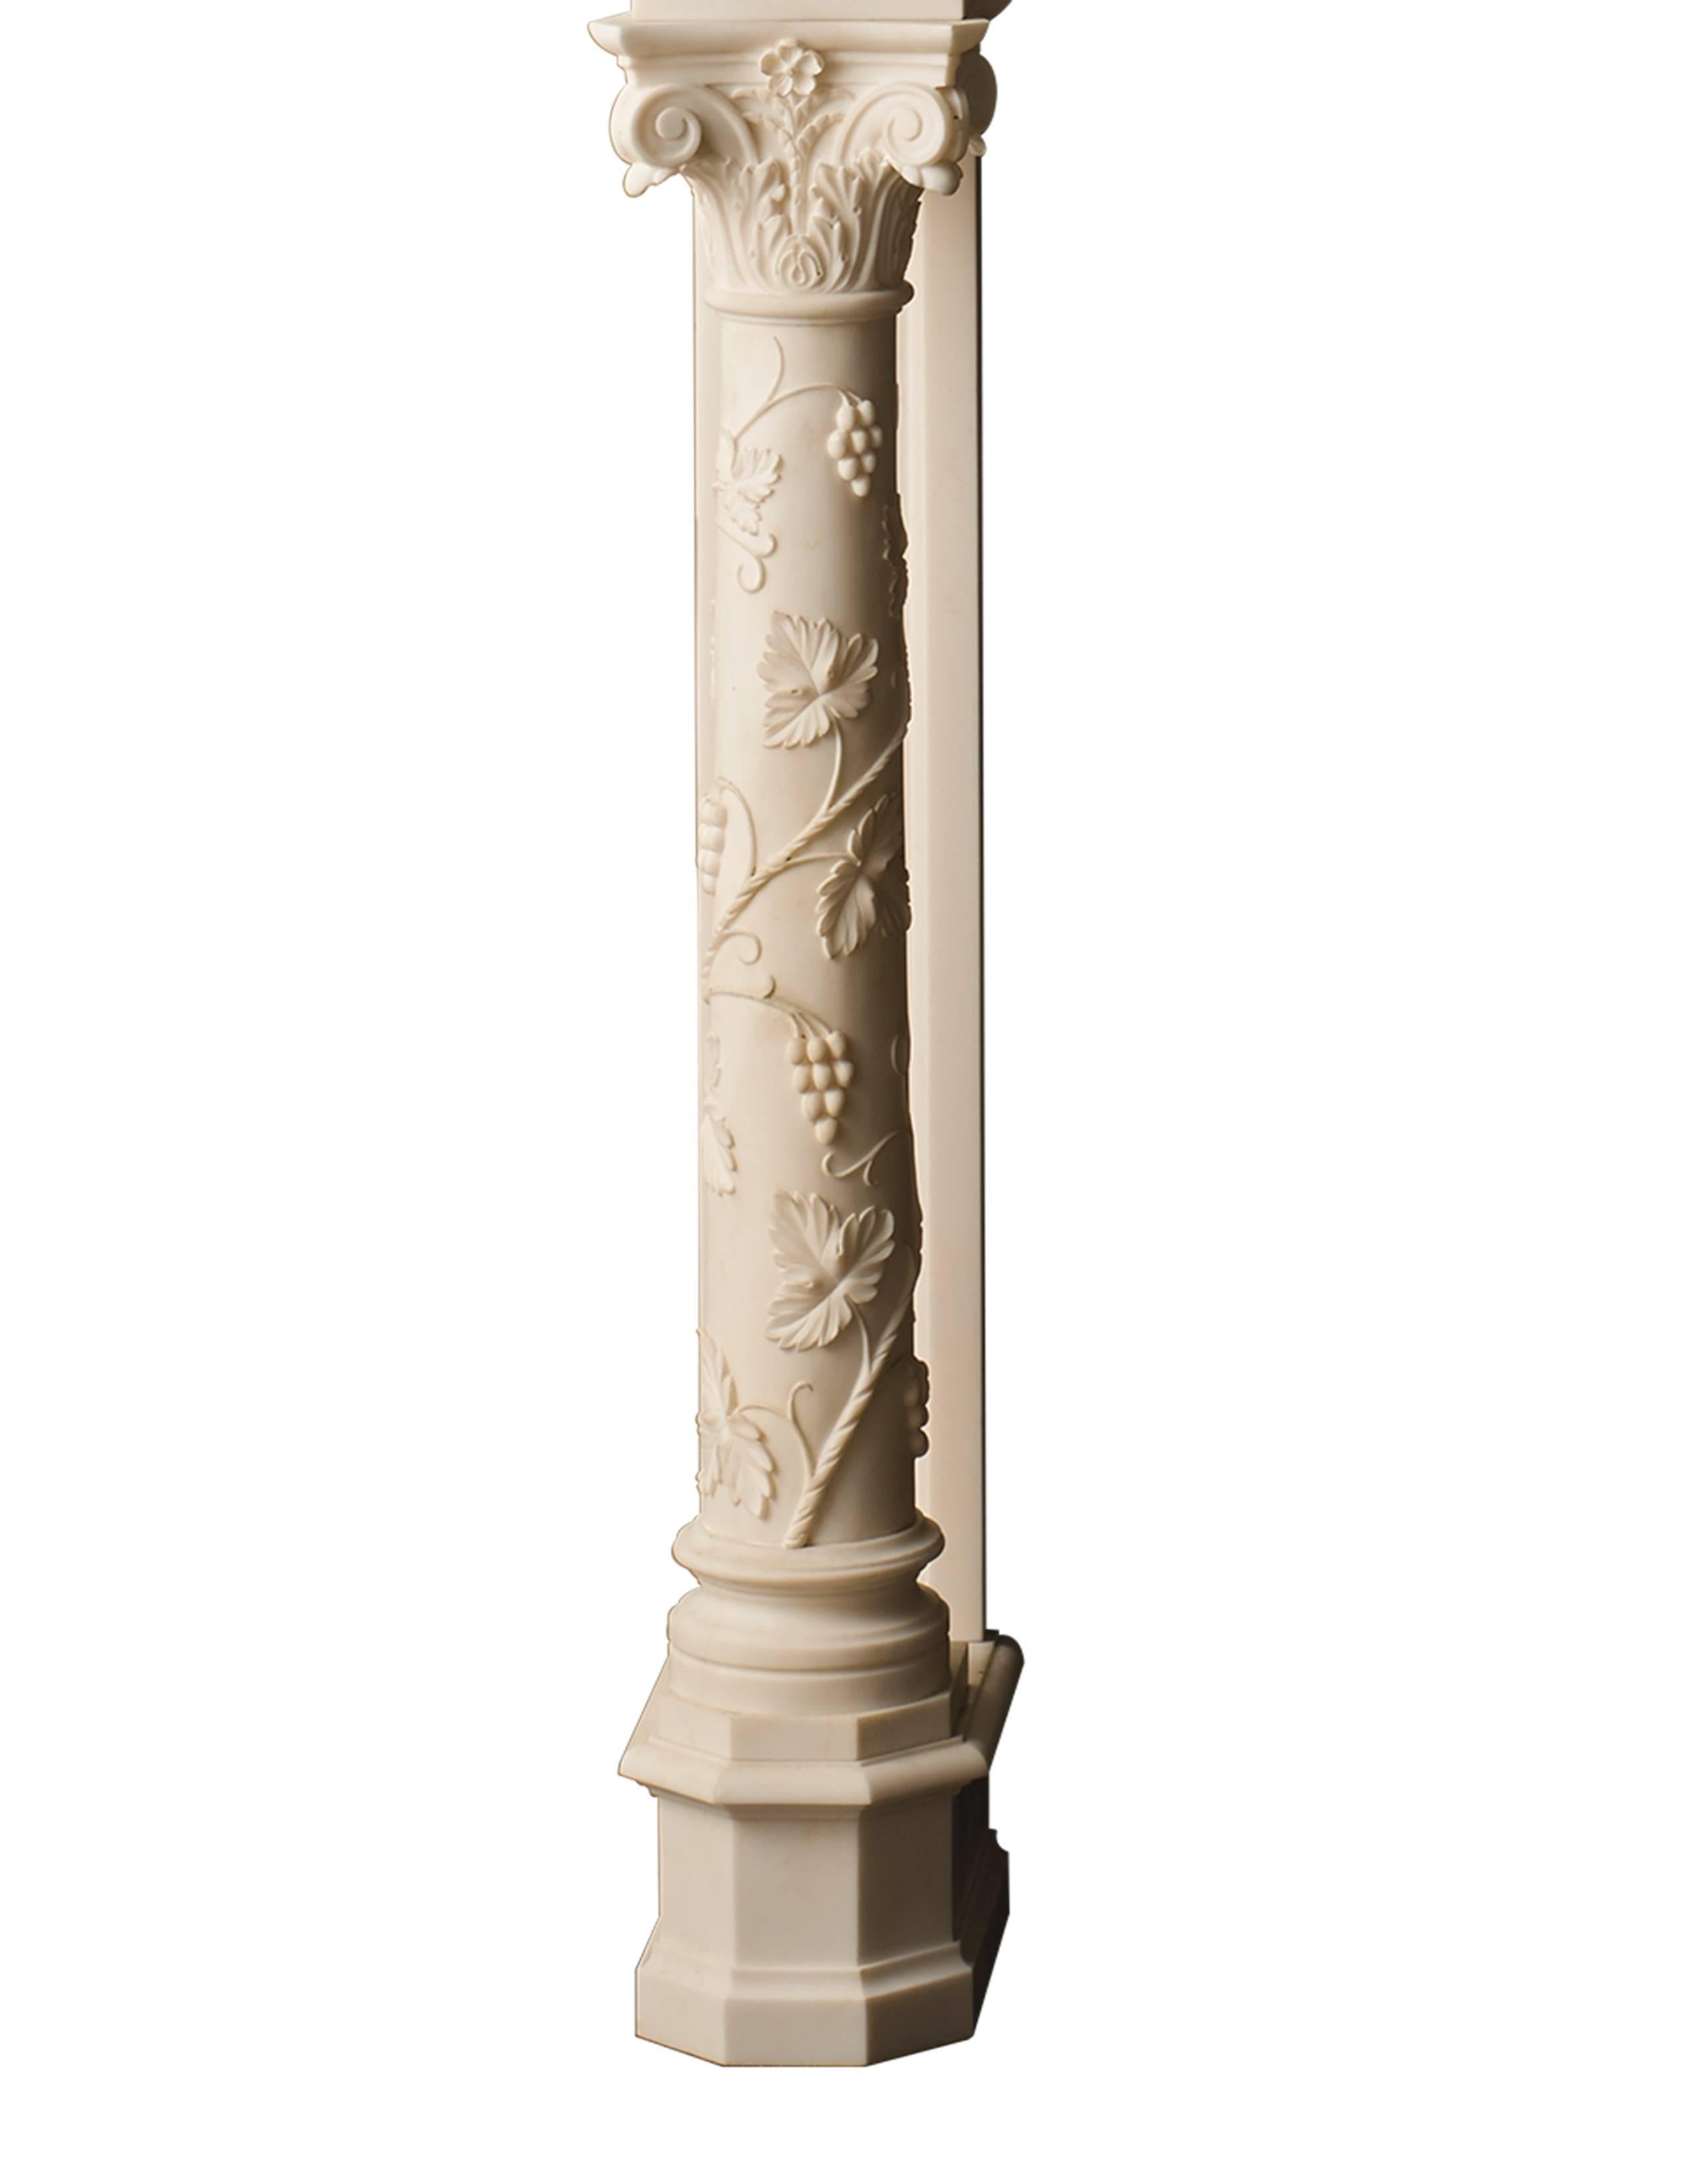 European Highly Carved Italian Style Mantel in Marble 'The Bellagio'